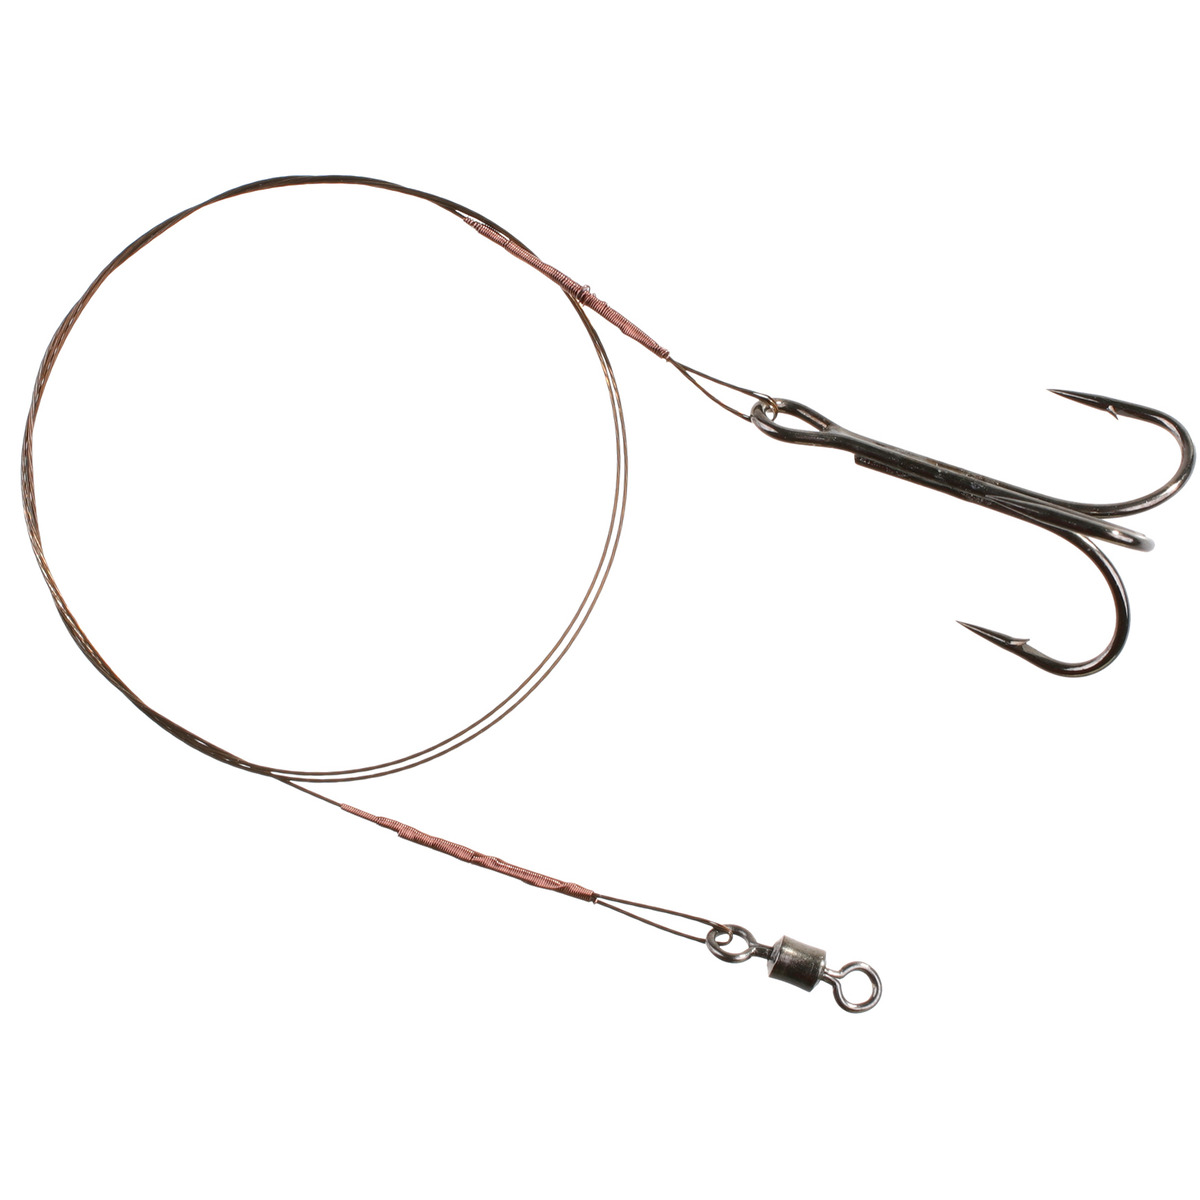 Mikado Steel Leaderwith Swivel And Double Treble Hook - 40 cm / 10kg  BROWN